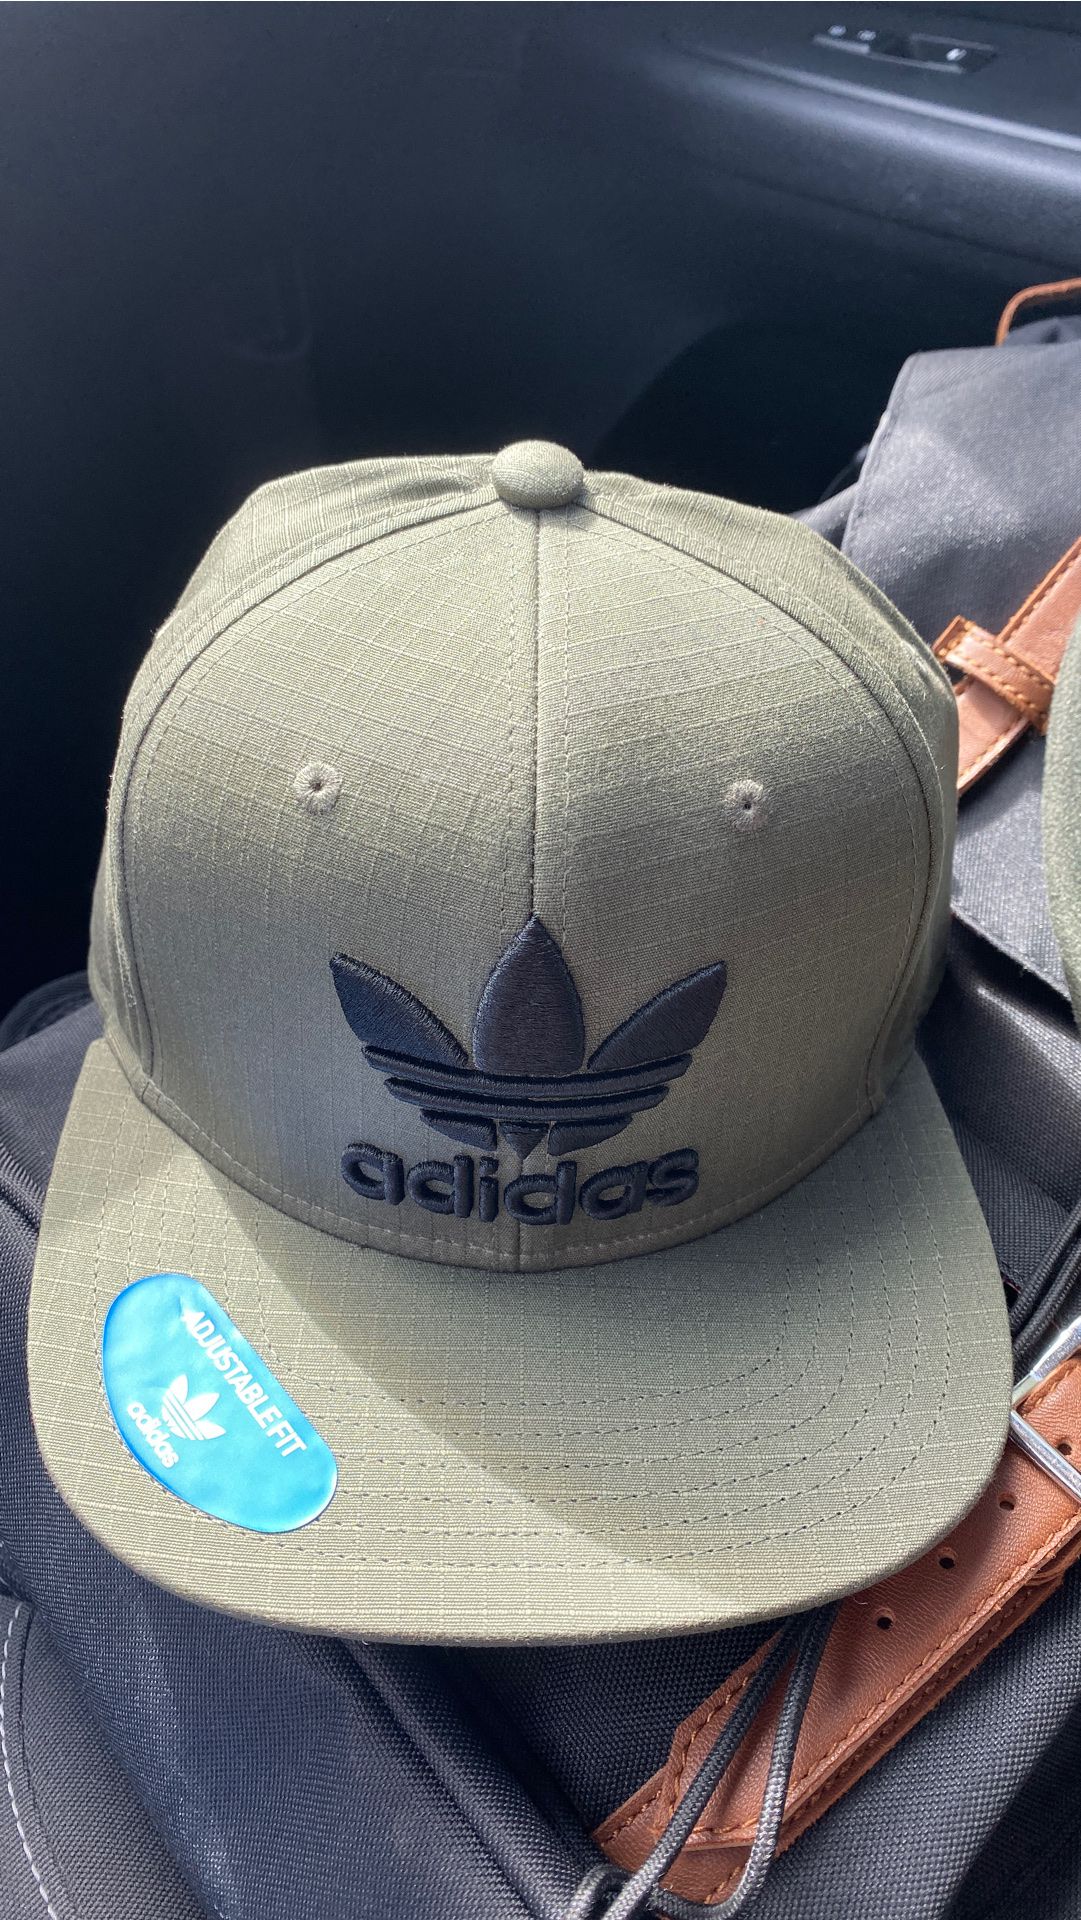 Adidas olive green snap back hat NEW